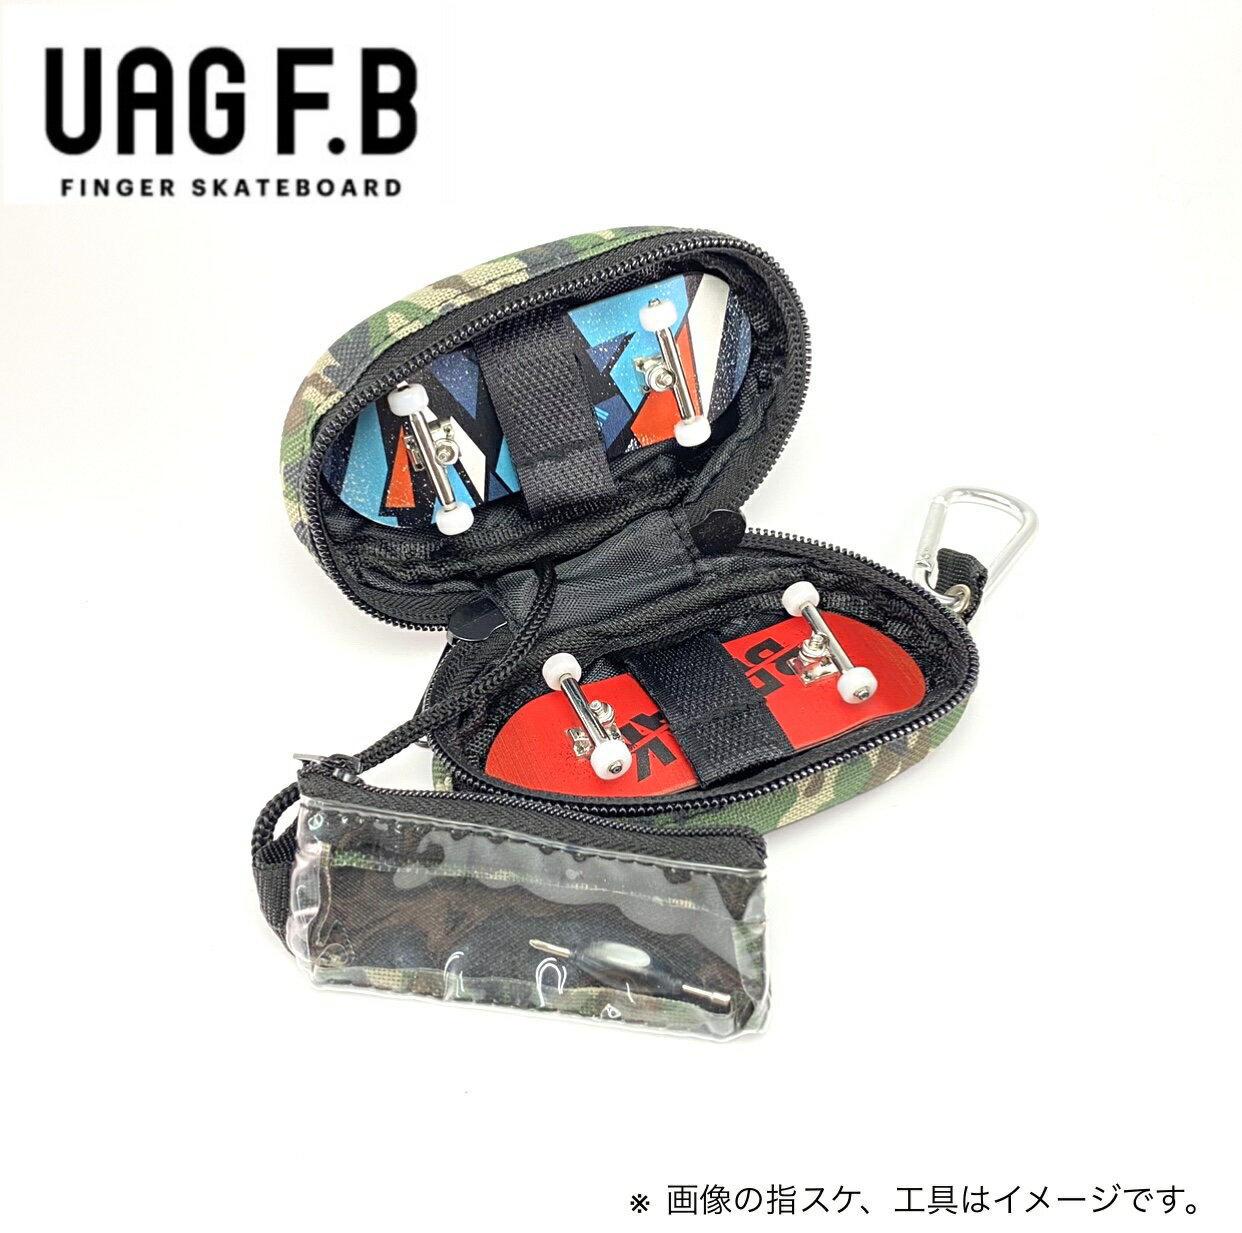 UAG F.B / <strong>指スケ</strong>バッグ Camouflage / finger skate board /<strong>指スケ</strong> / <strong>指スケ</strong>ボー